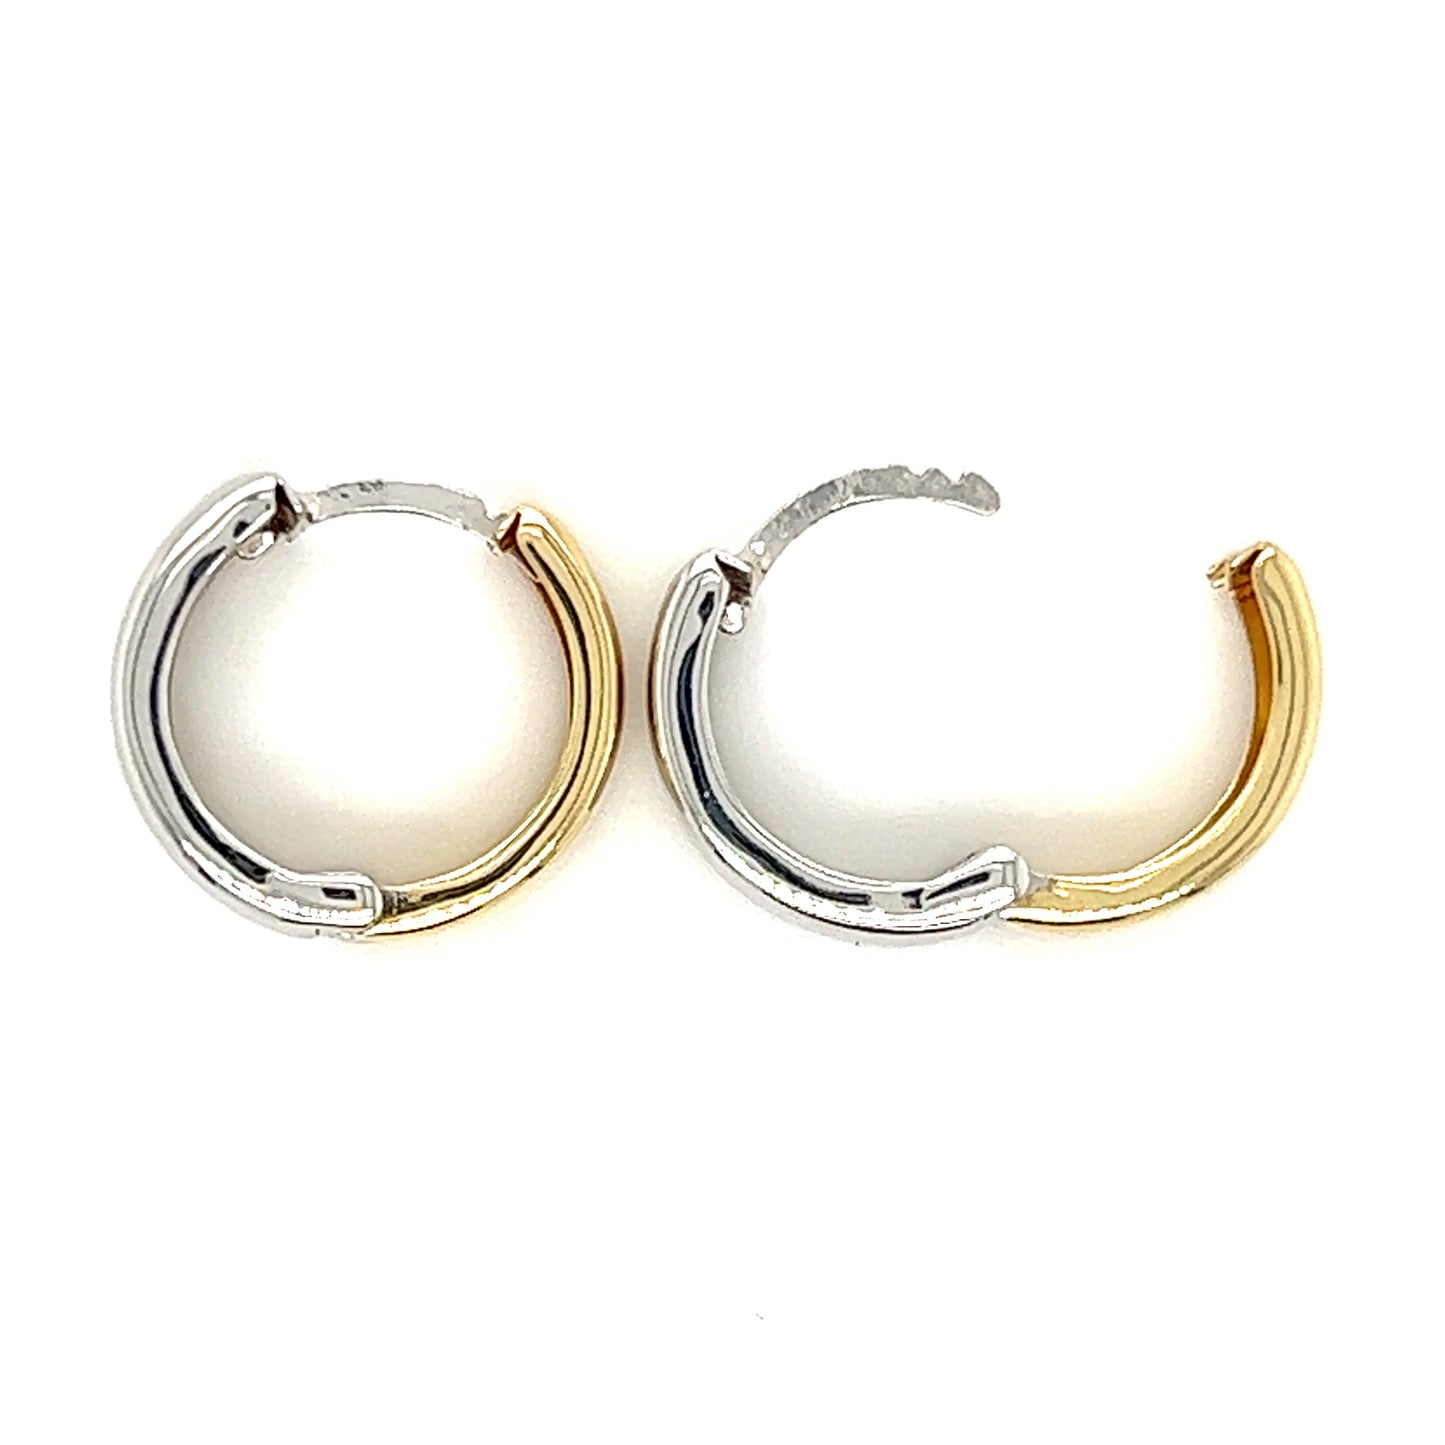 Reversible Hoop Earrings 4.7mm in 14K White and Yellow Gold. Closed and open side view.